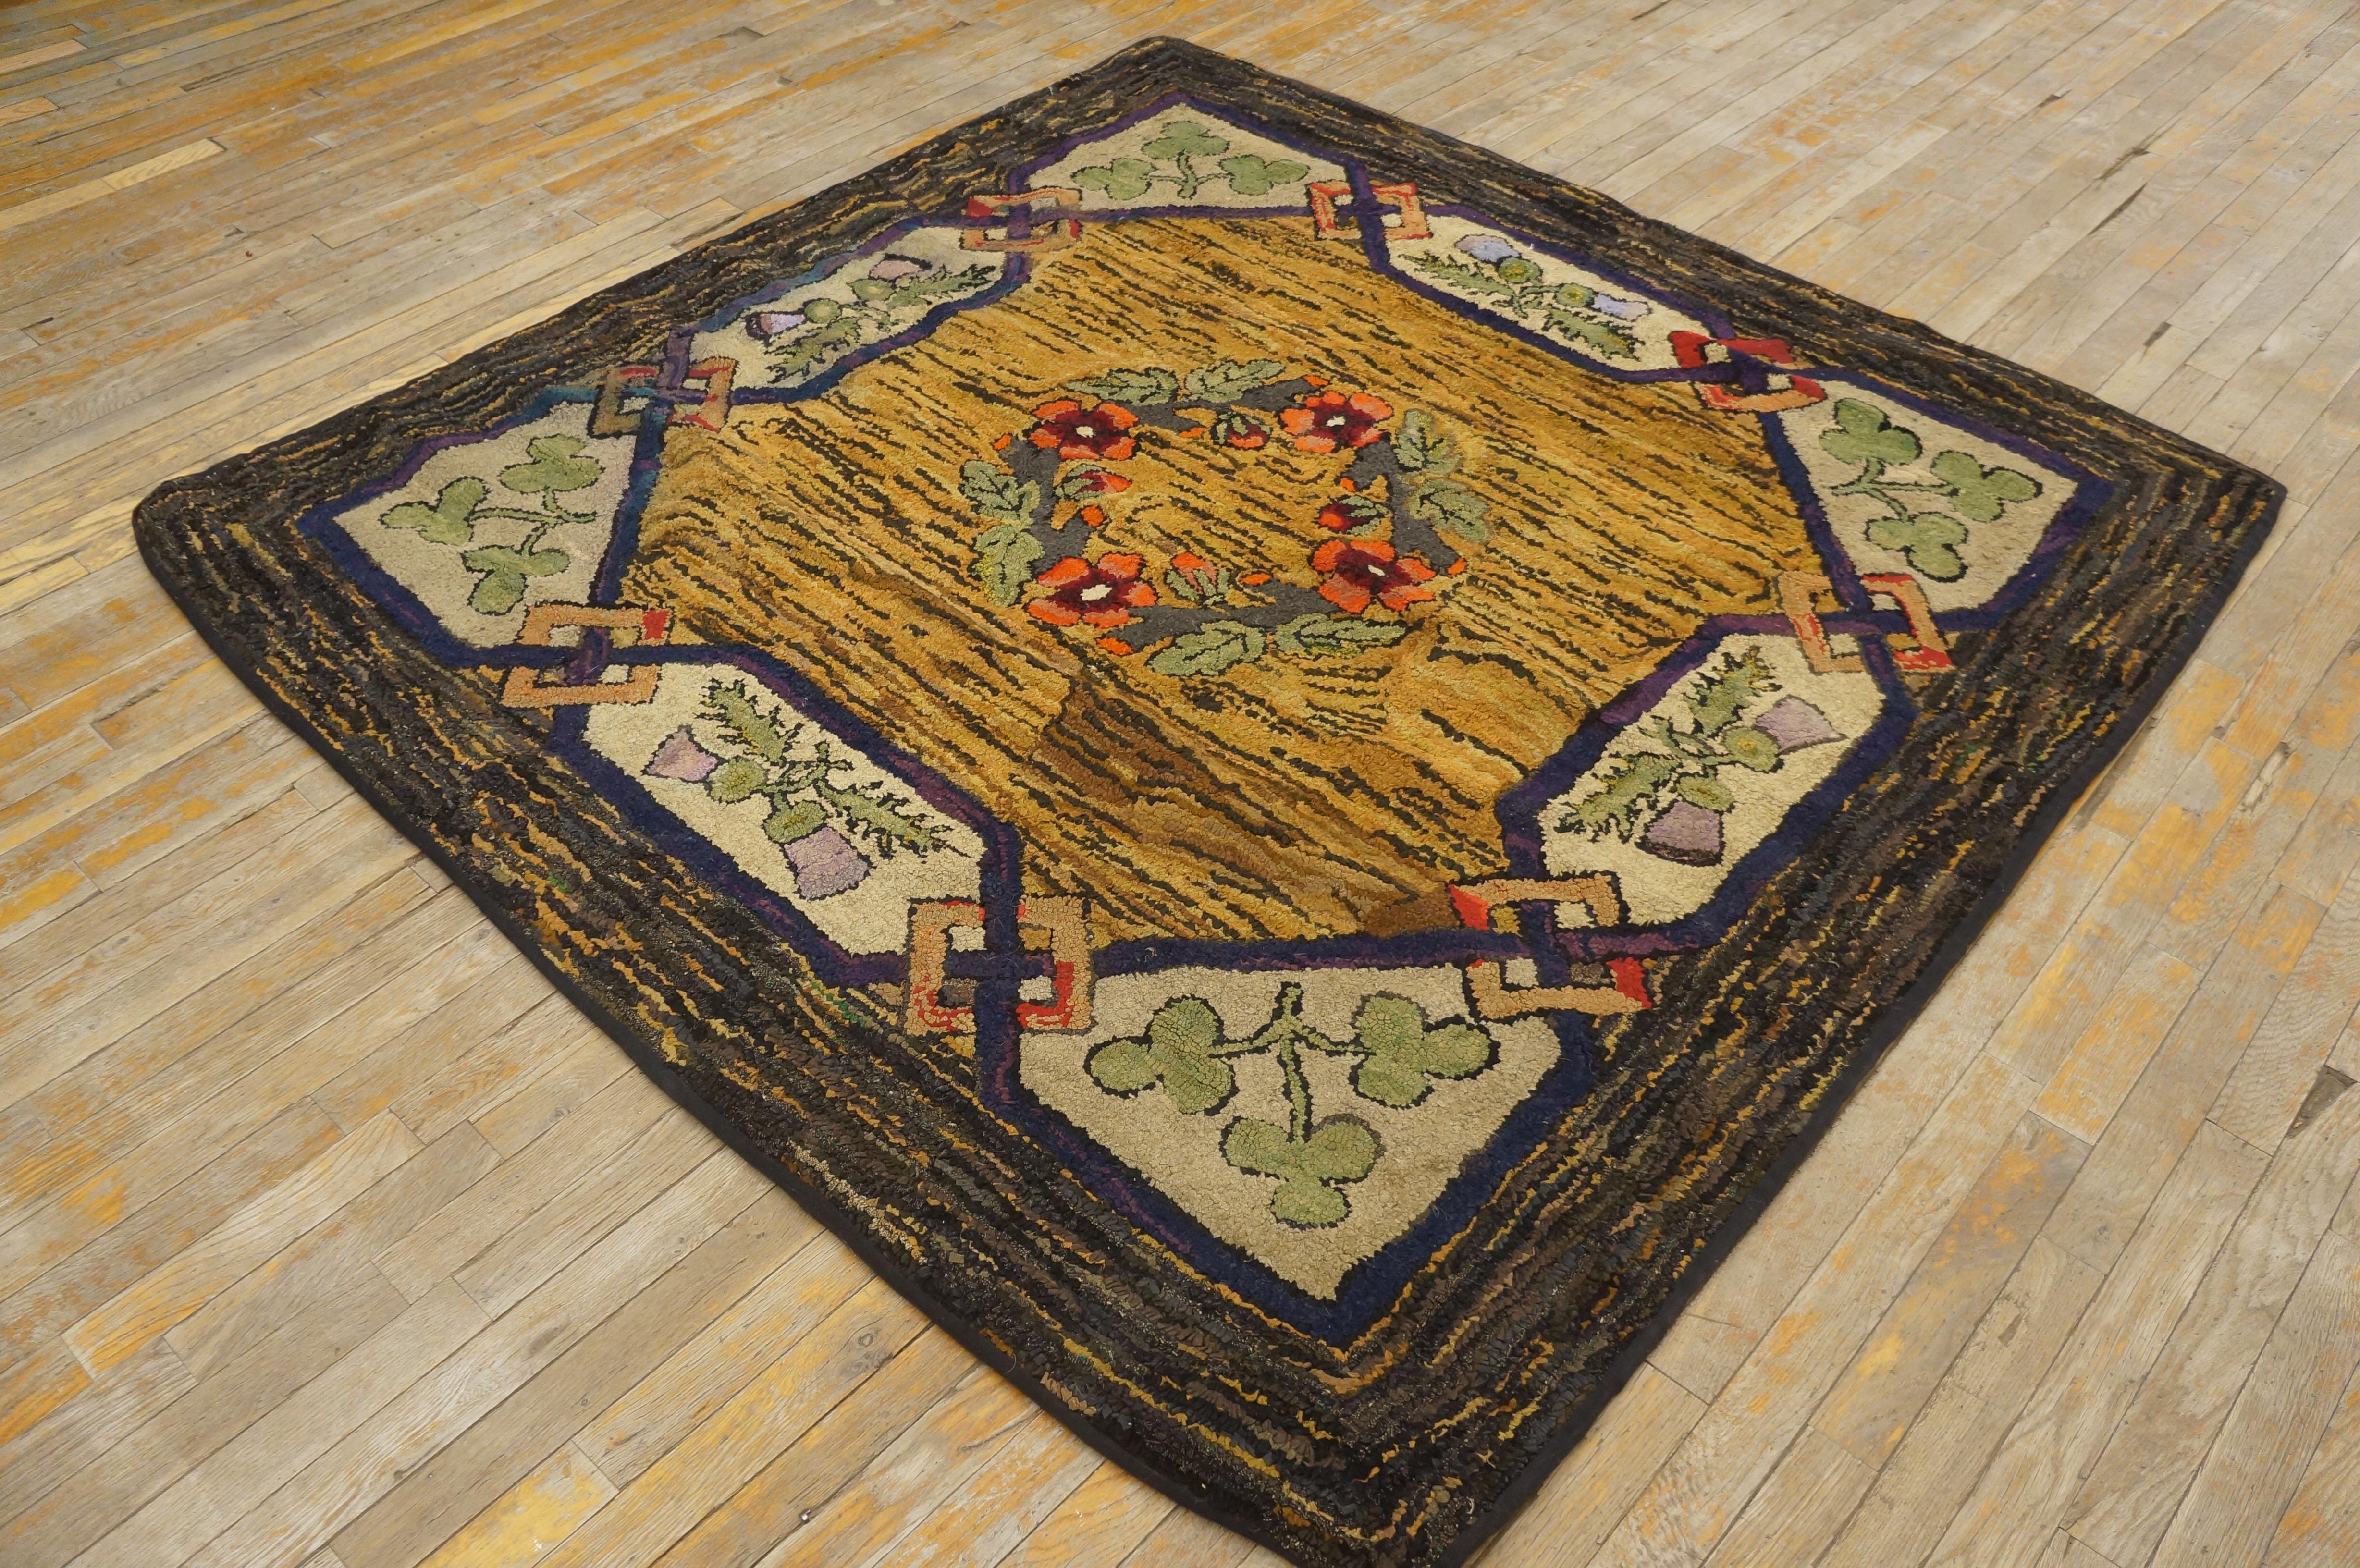 Early 20th Century American Hooked Rug ( 6' x 6' - 183 x 183 ) For Sale 2